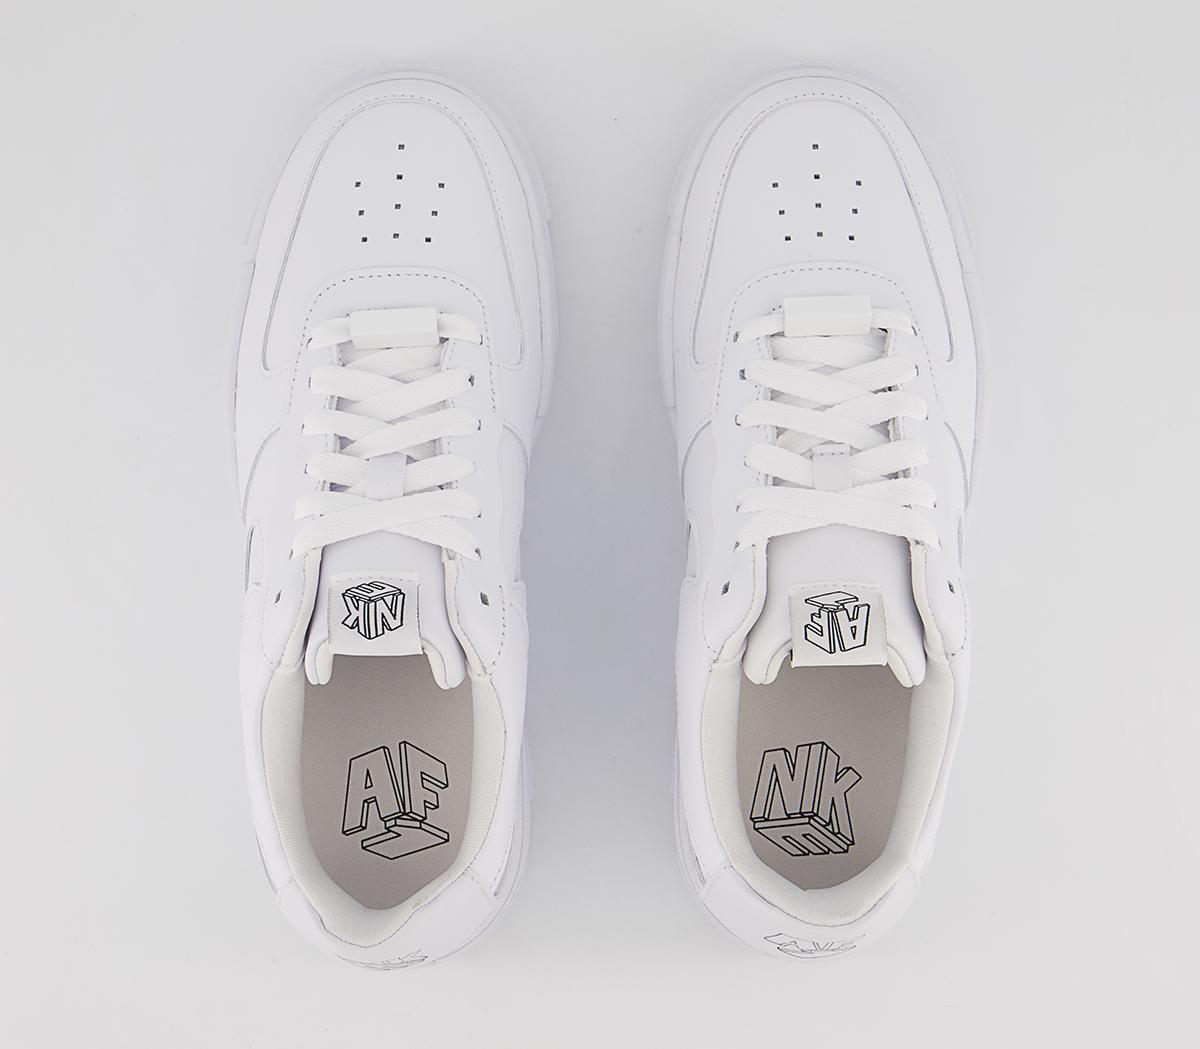 Nike Air Force 1 Pixel Trainers White White Black Sail - Hers trainers